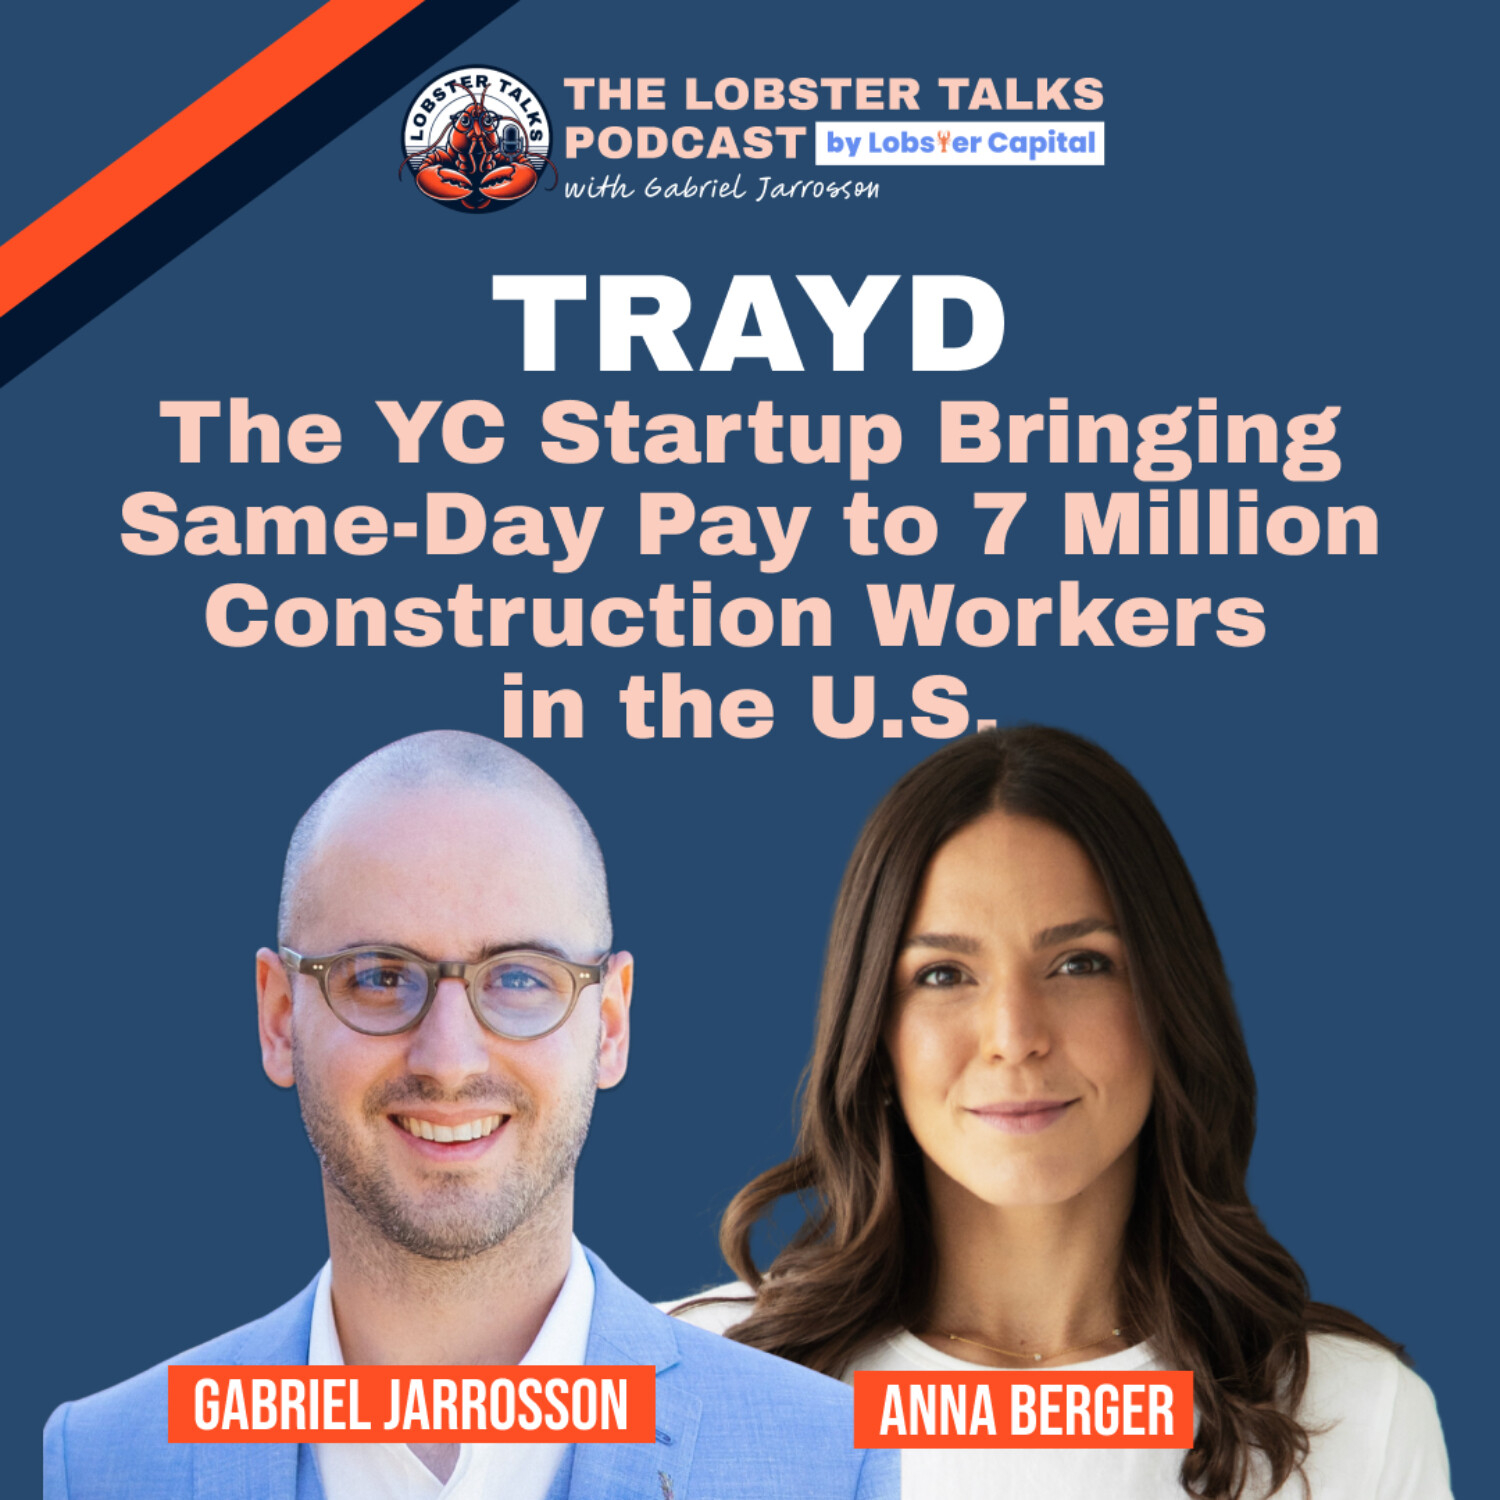 Trayd - The YC Startup Bringing Same-Day Pay to 7 Million Construction Workers in the U.S. | Episode 4